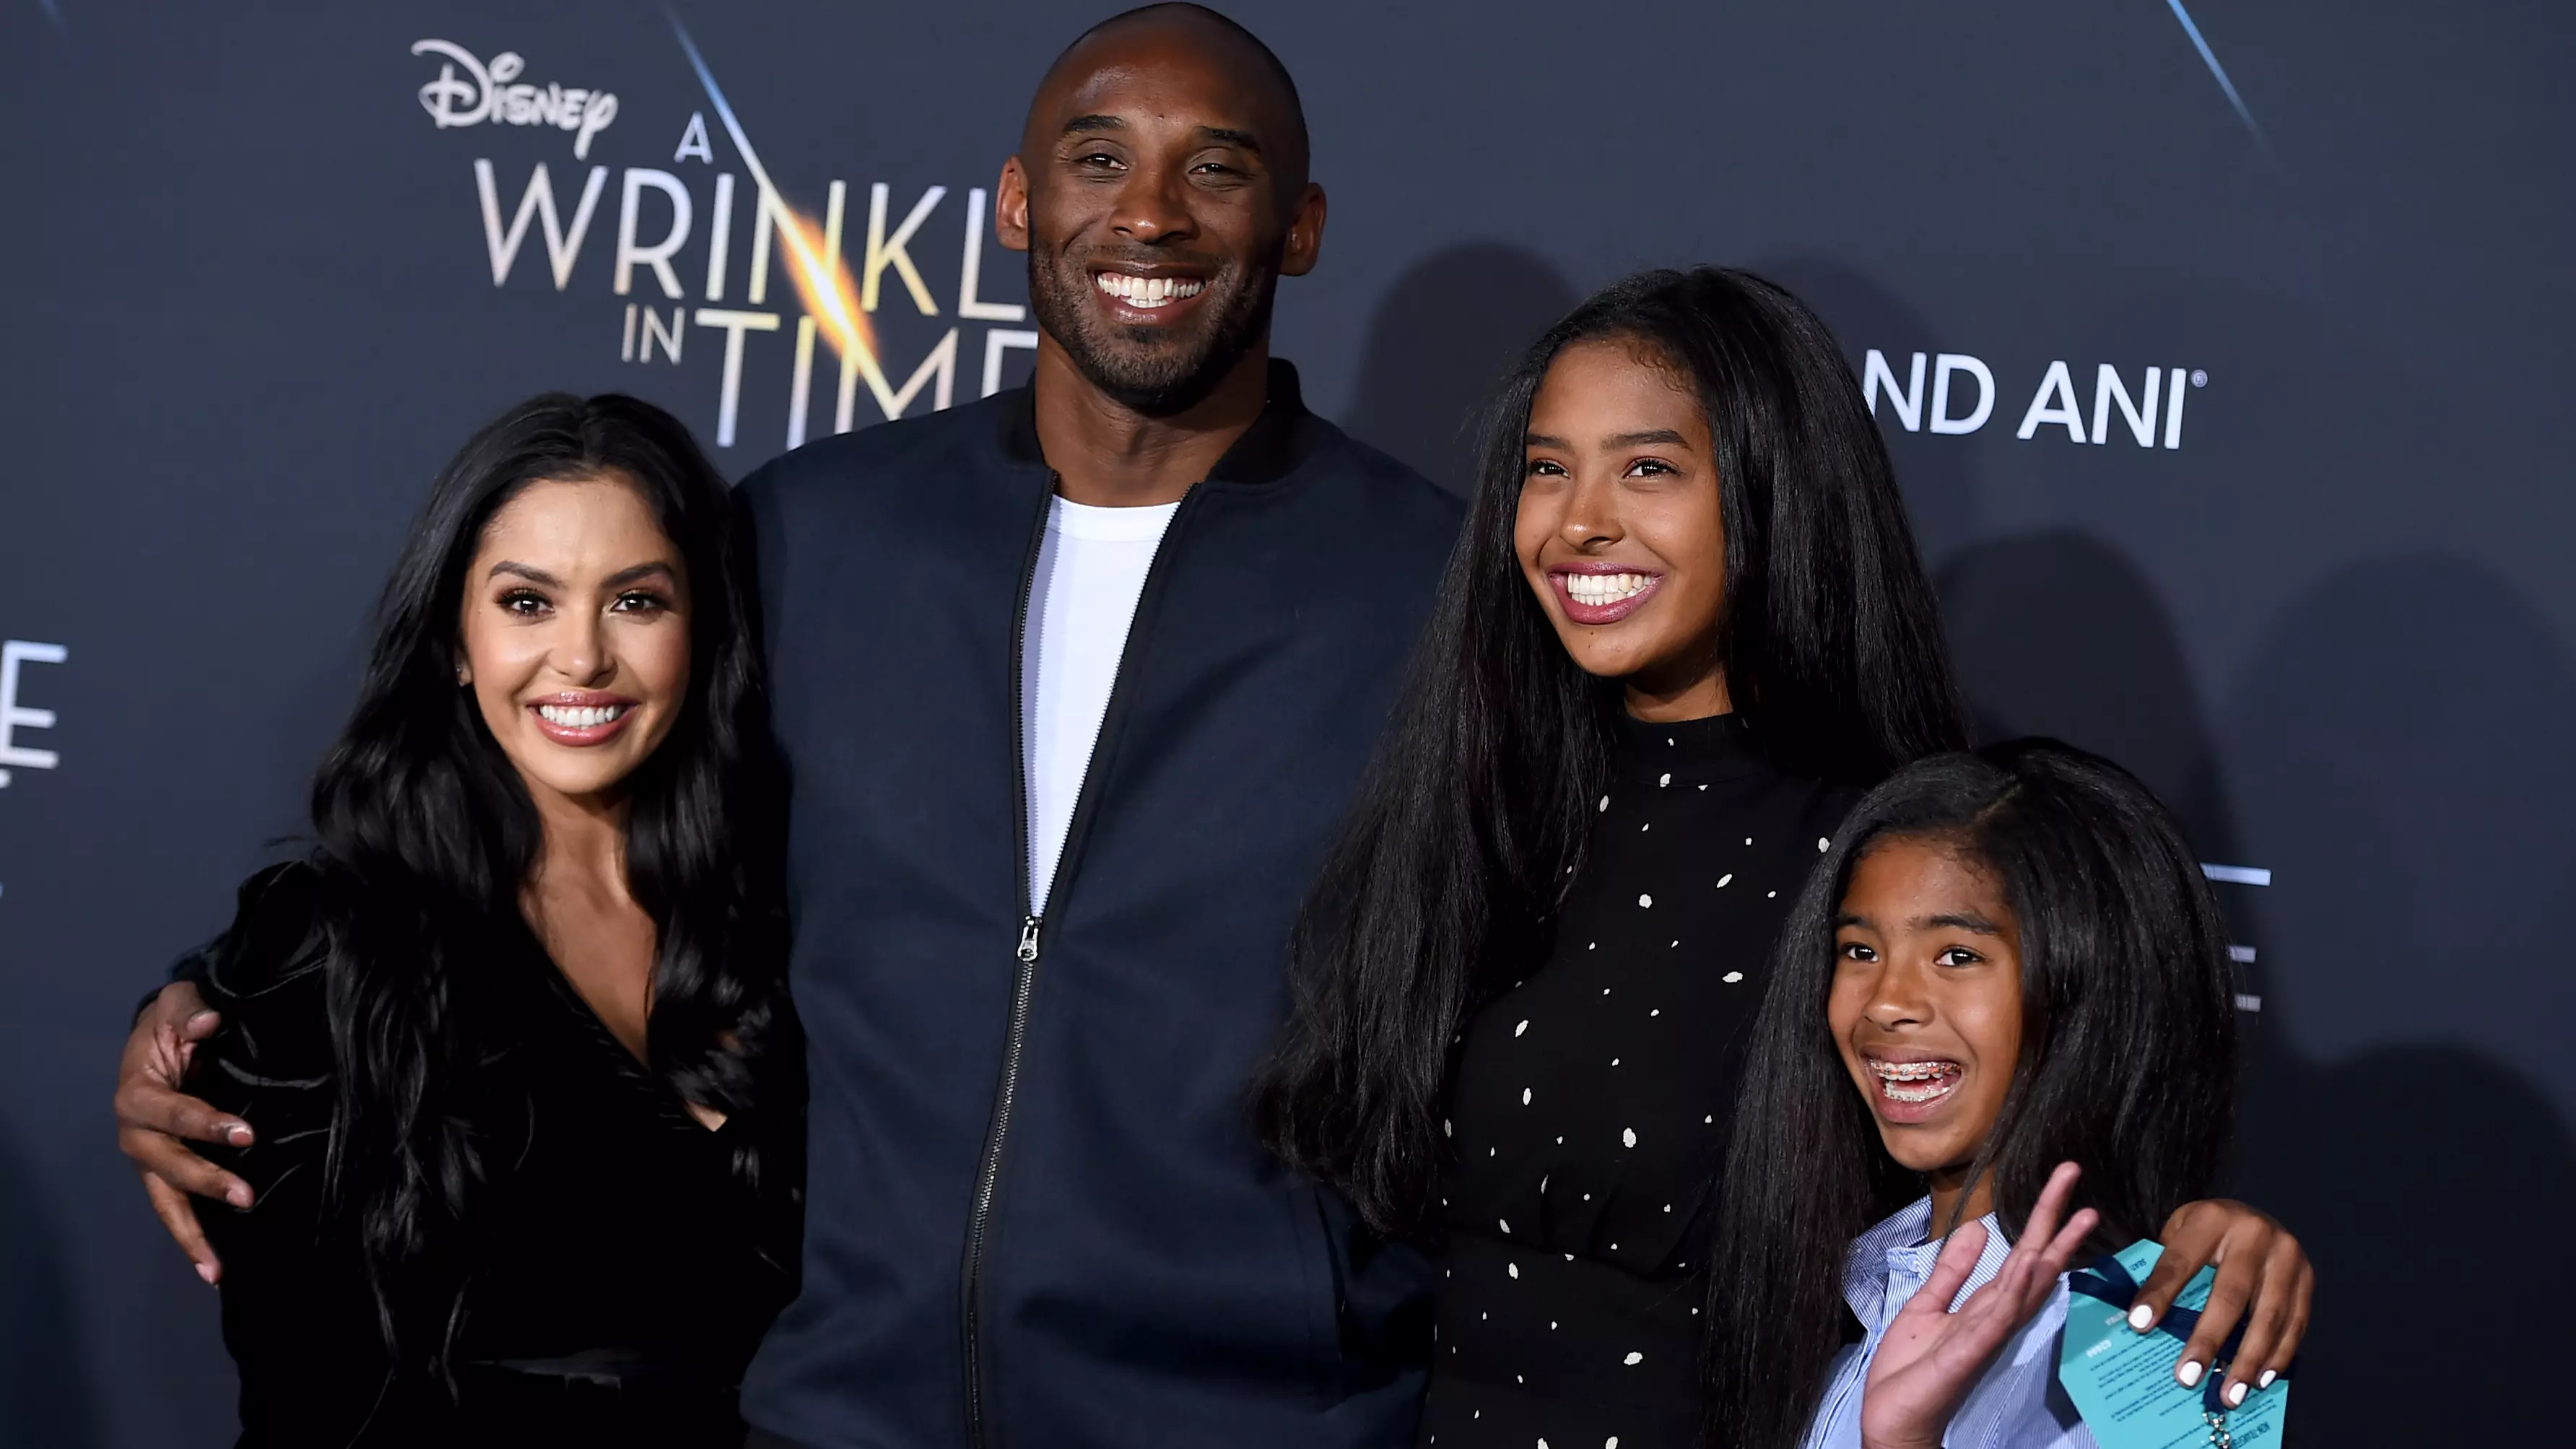 Vanessa Bryant Has Changed Her Instagram Profile Photo To One Of Kobe And Gianna